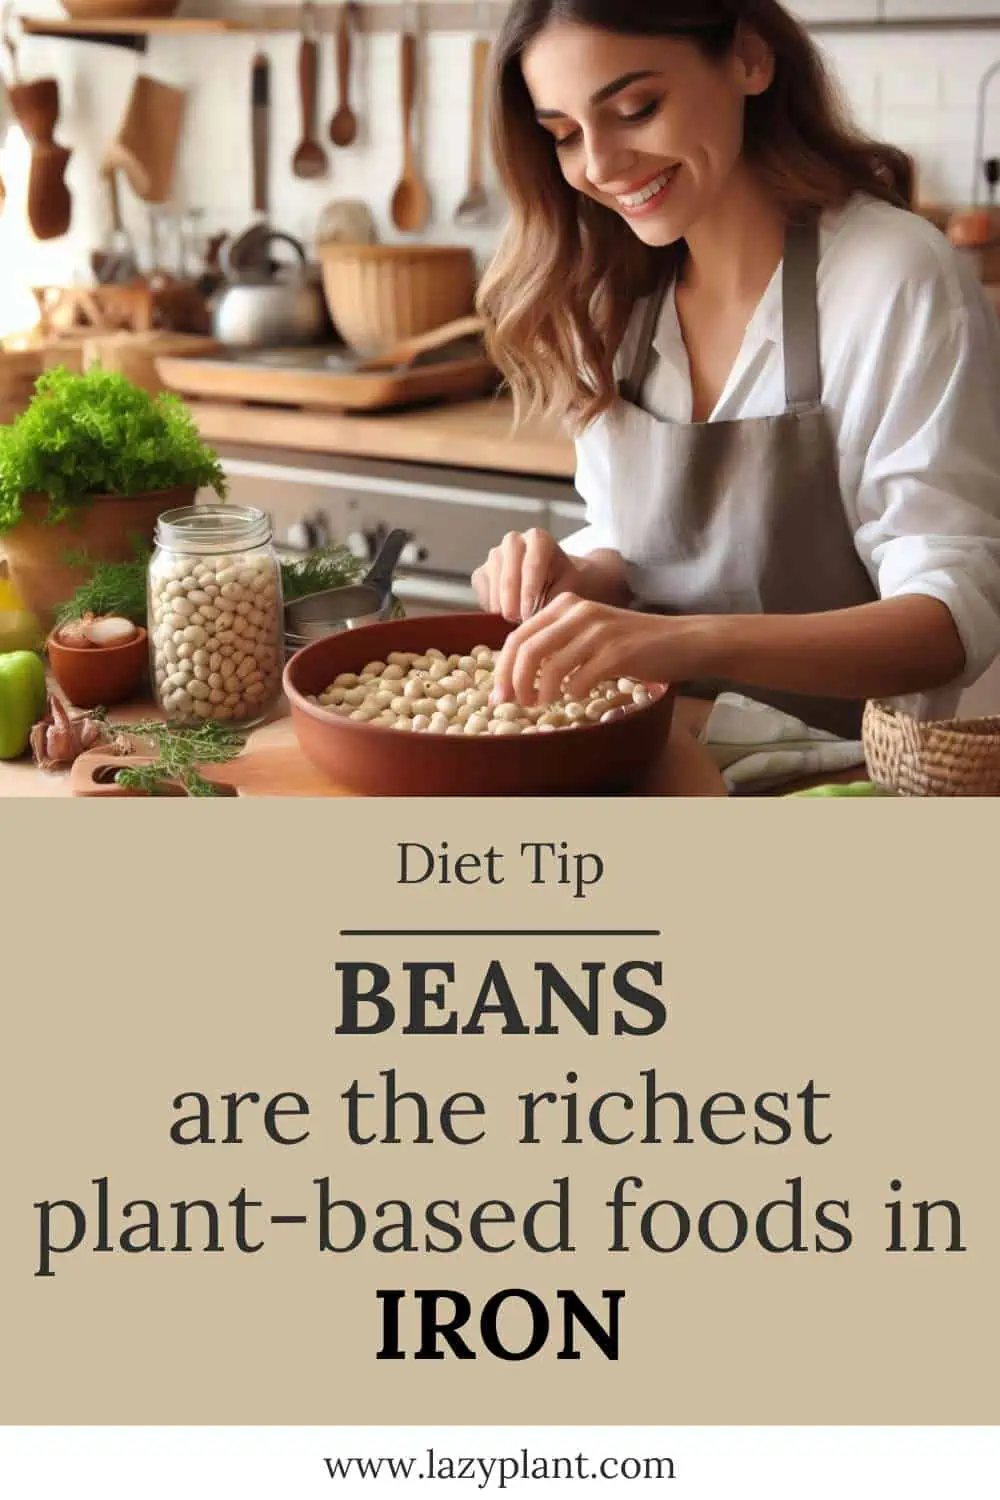 Can vegetarians & vegans depend on beans for Iron?